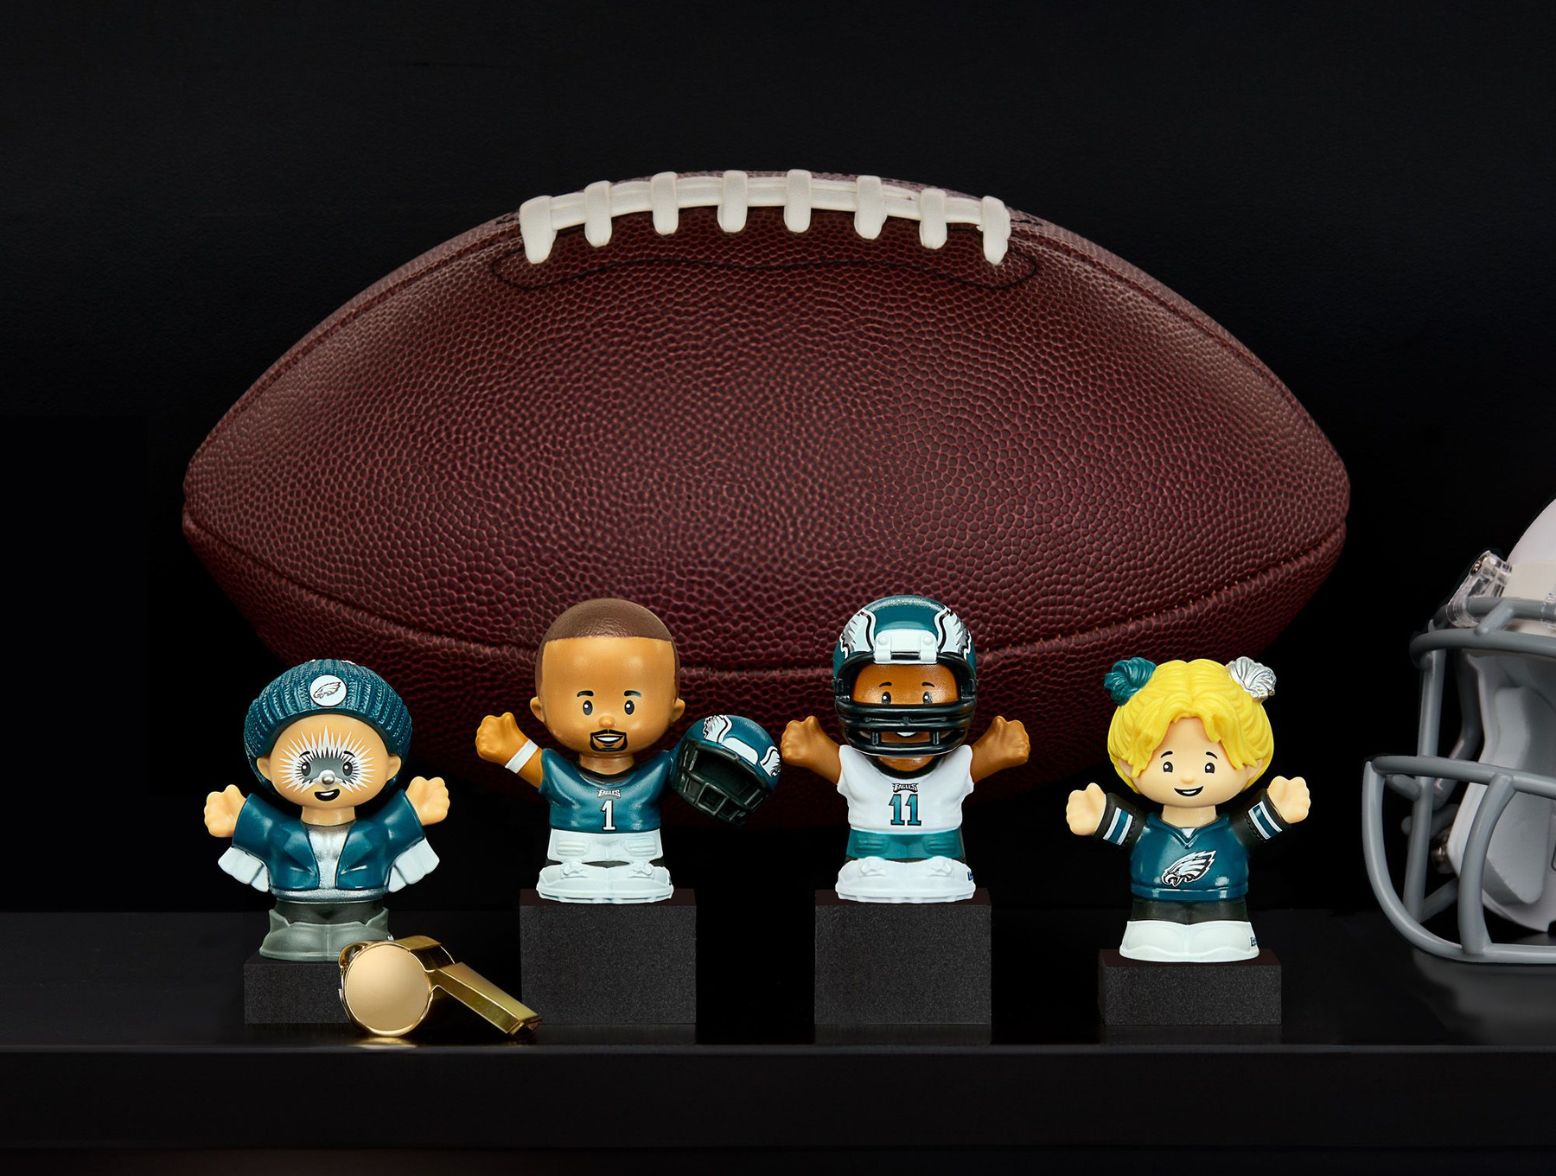 eagles little people collector set, feature a male eagles fan, Jalen hurts, aj brown, and a female eagles fan